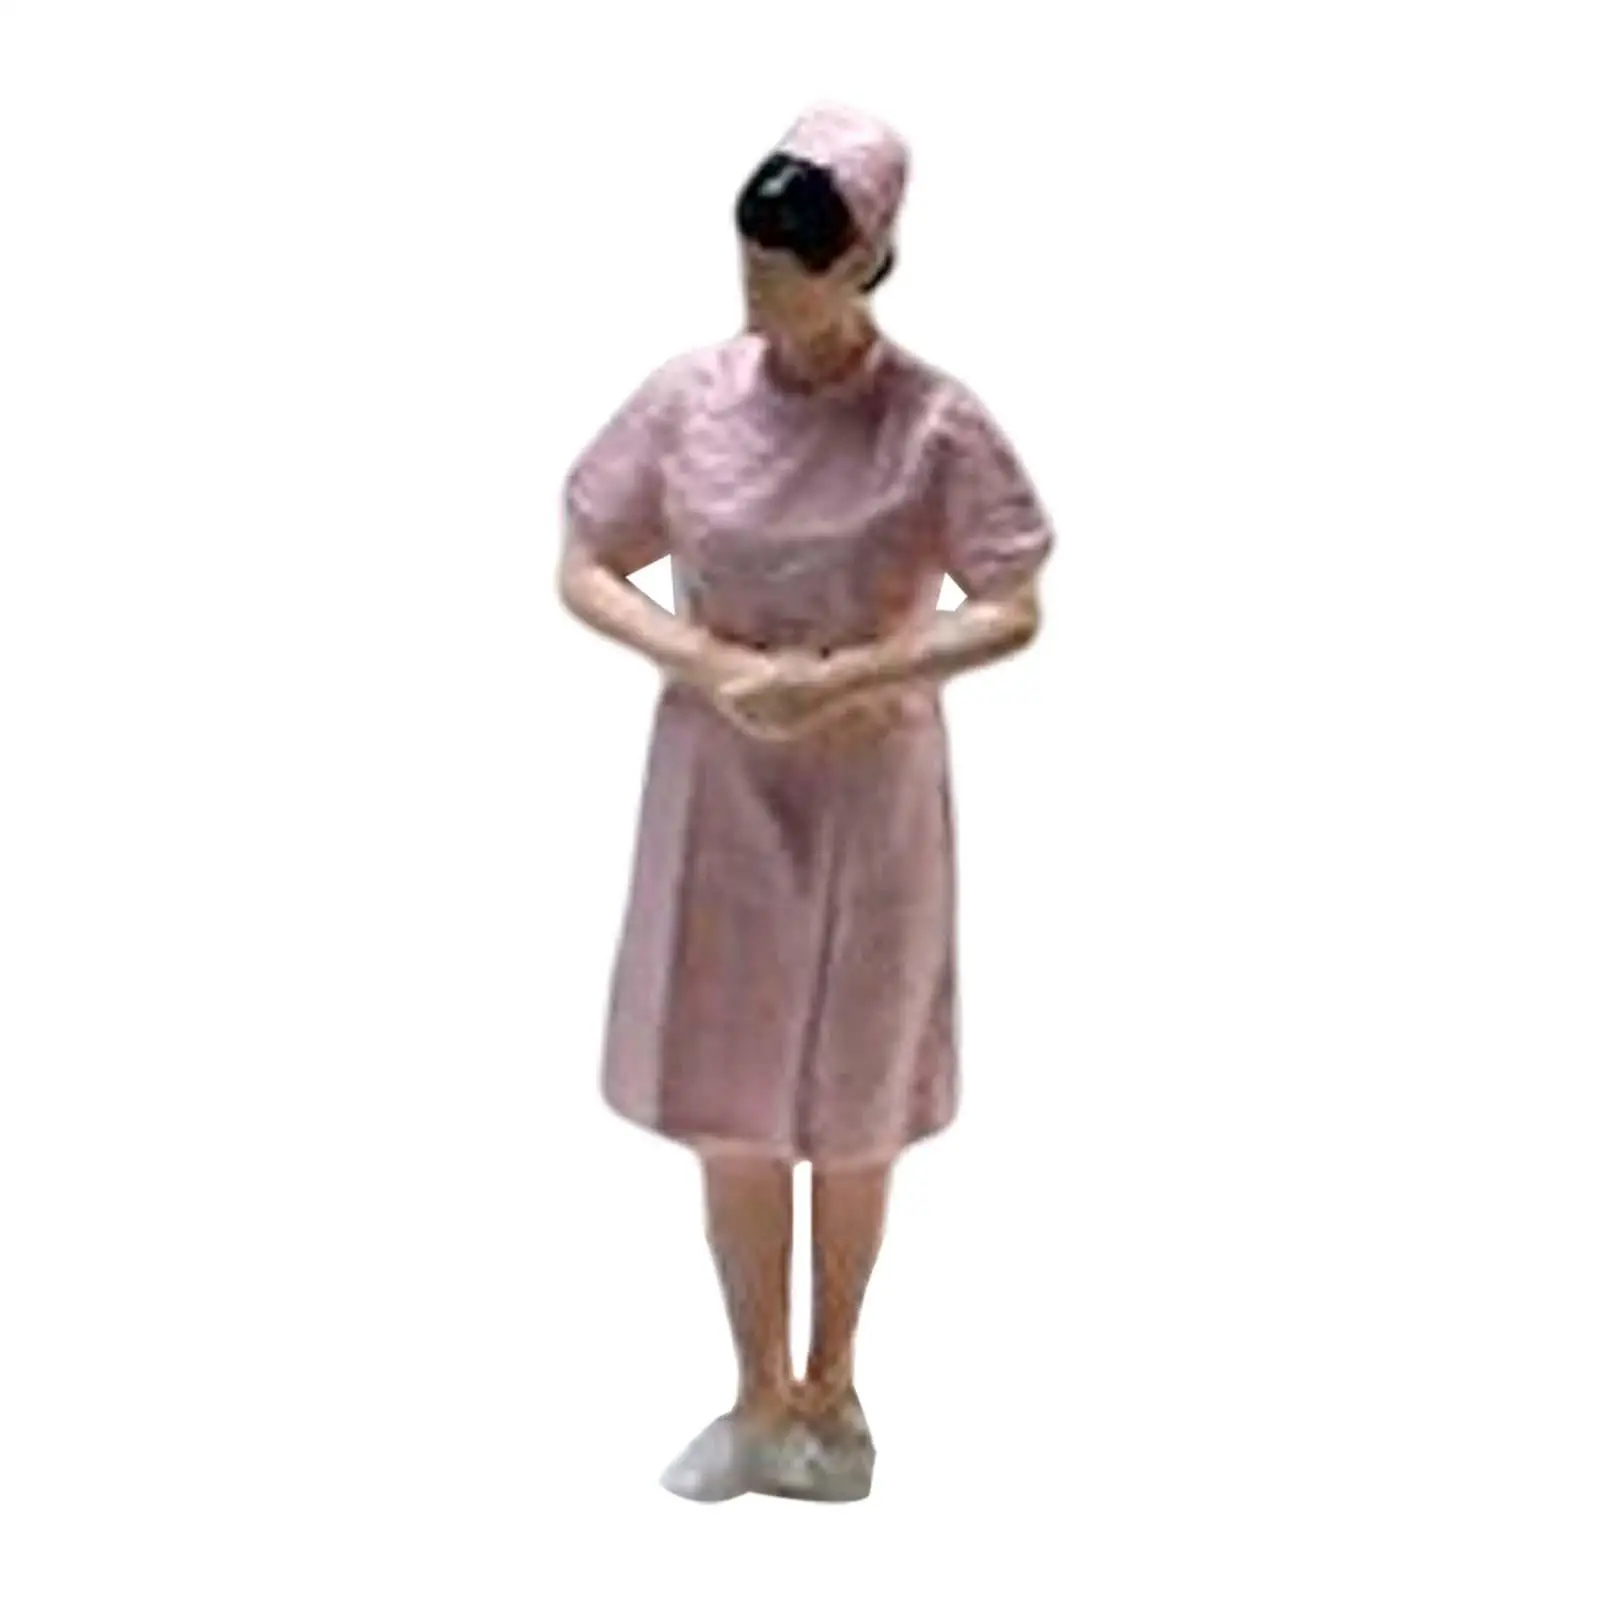 Painted 1/64 People Figure Tiny Nurse Statue Micro Landscape Scenery Park Street Diorama Architectural Building Railway Layout